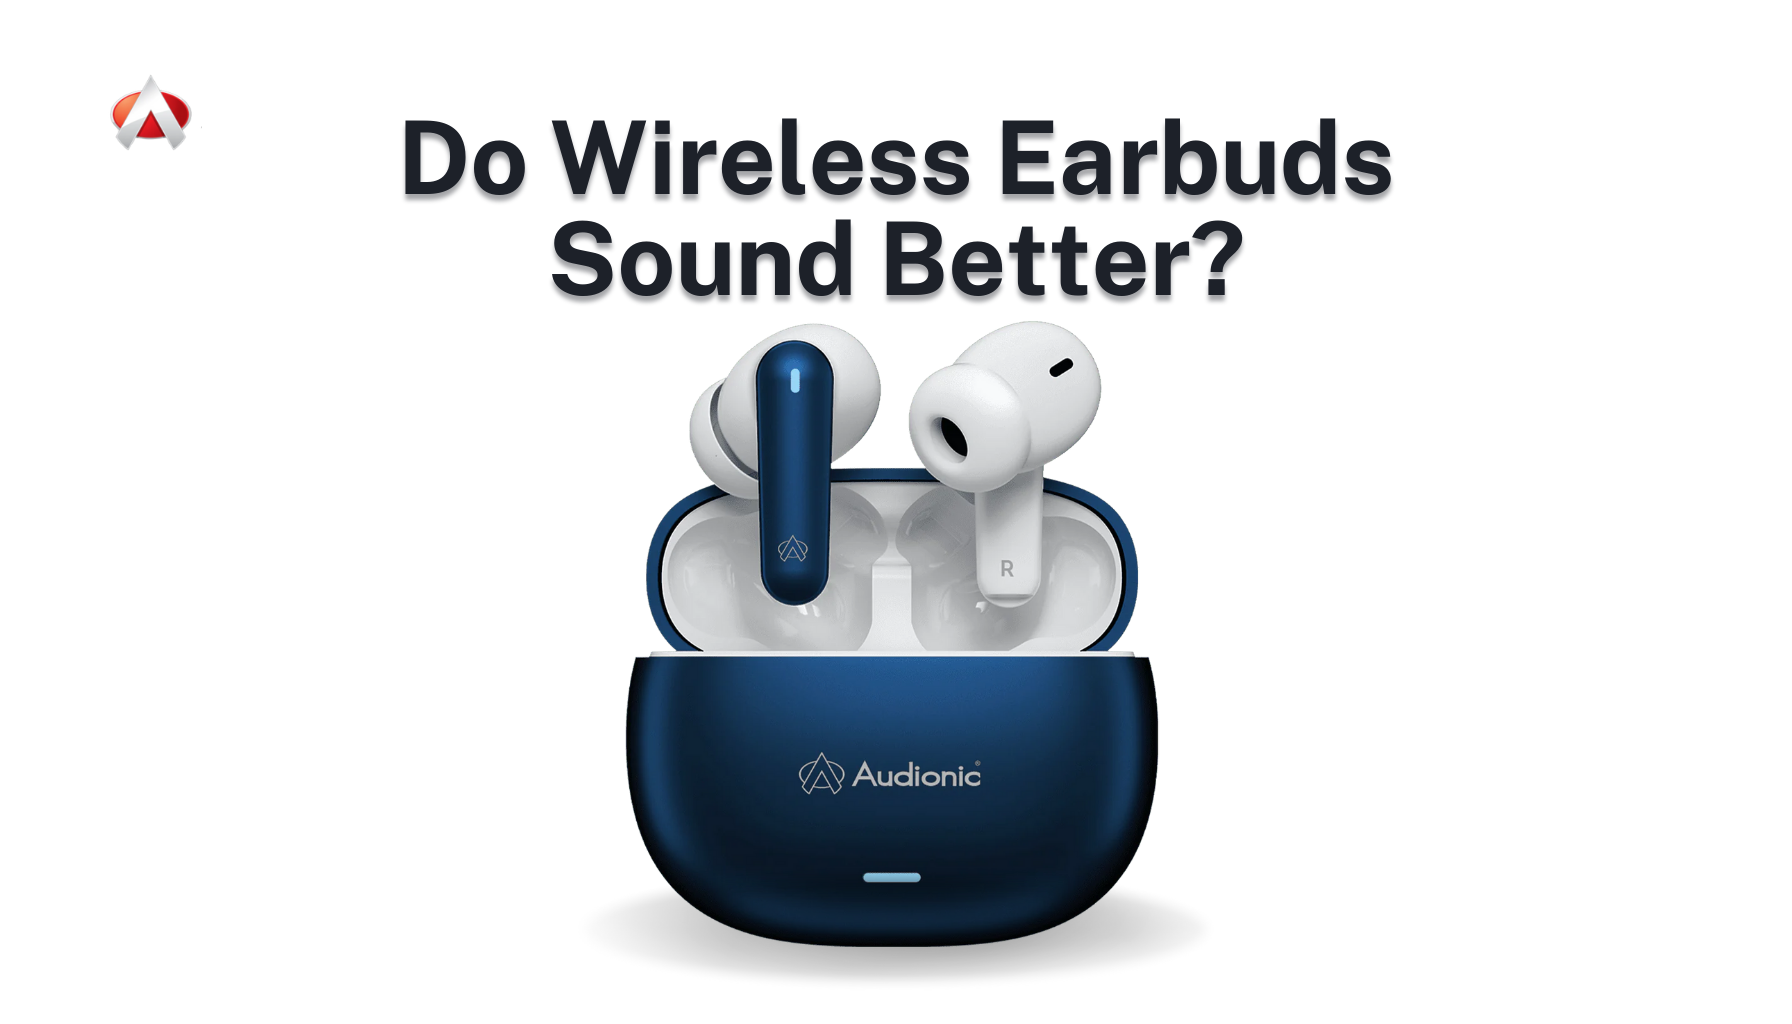 Do Wireless Earbuds Sound Better Than Wired?